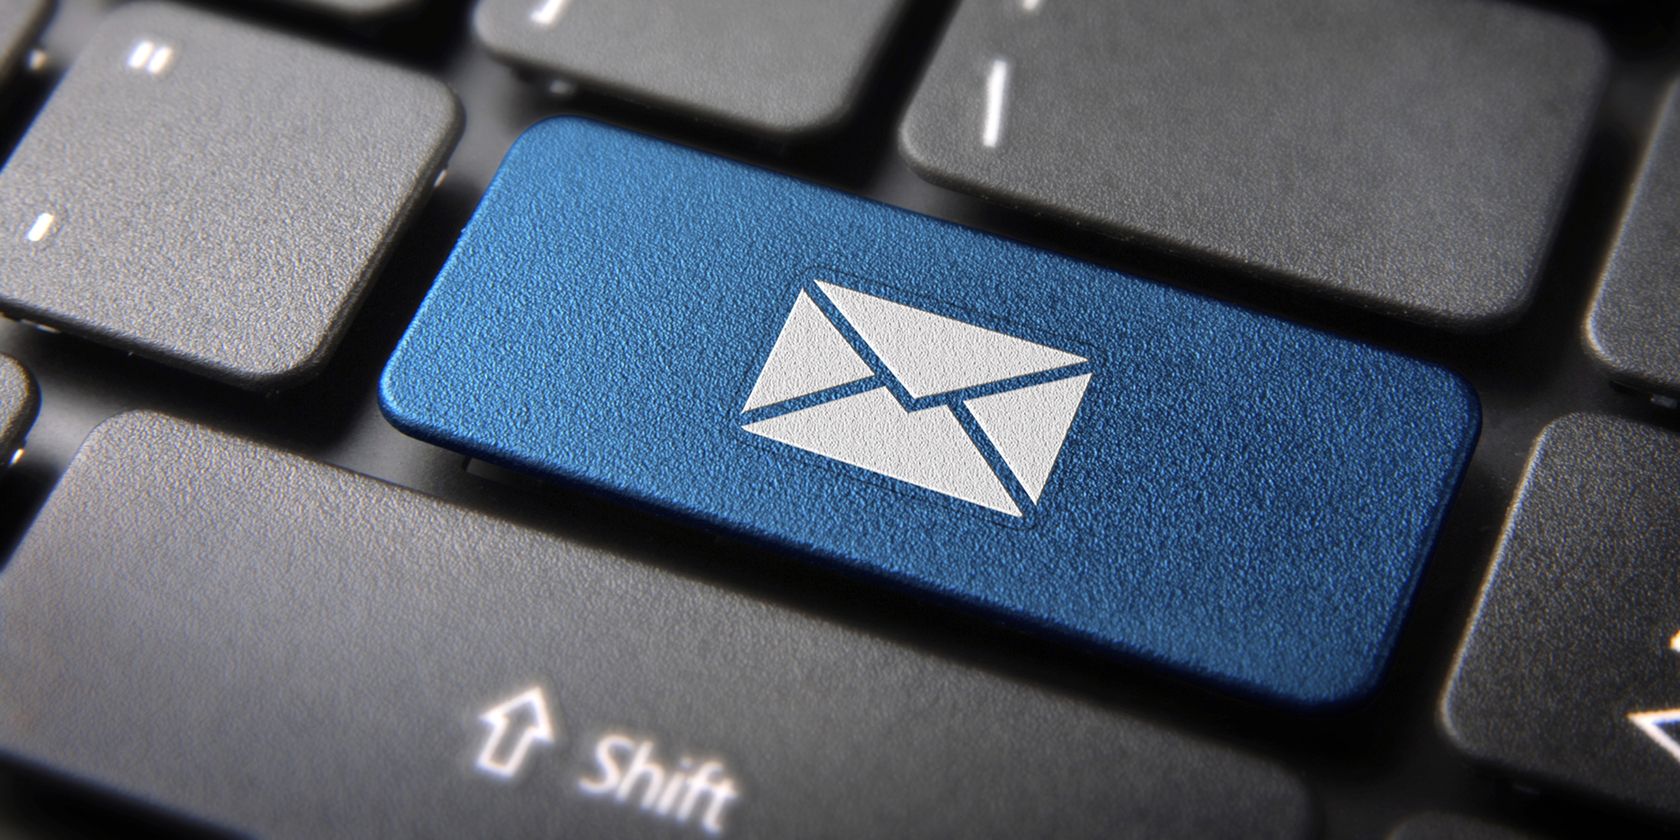 6 Ways Your Email Address Can Be Exploited by Scammers